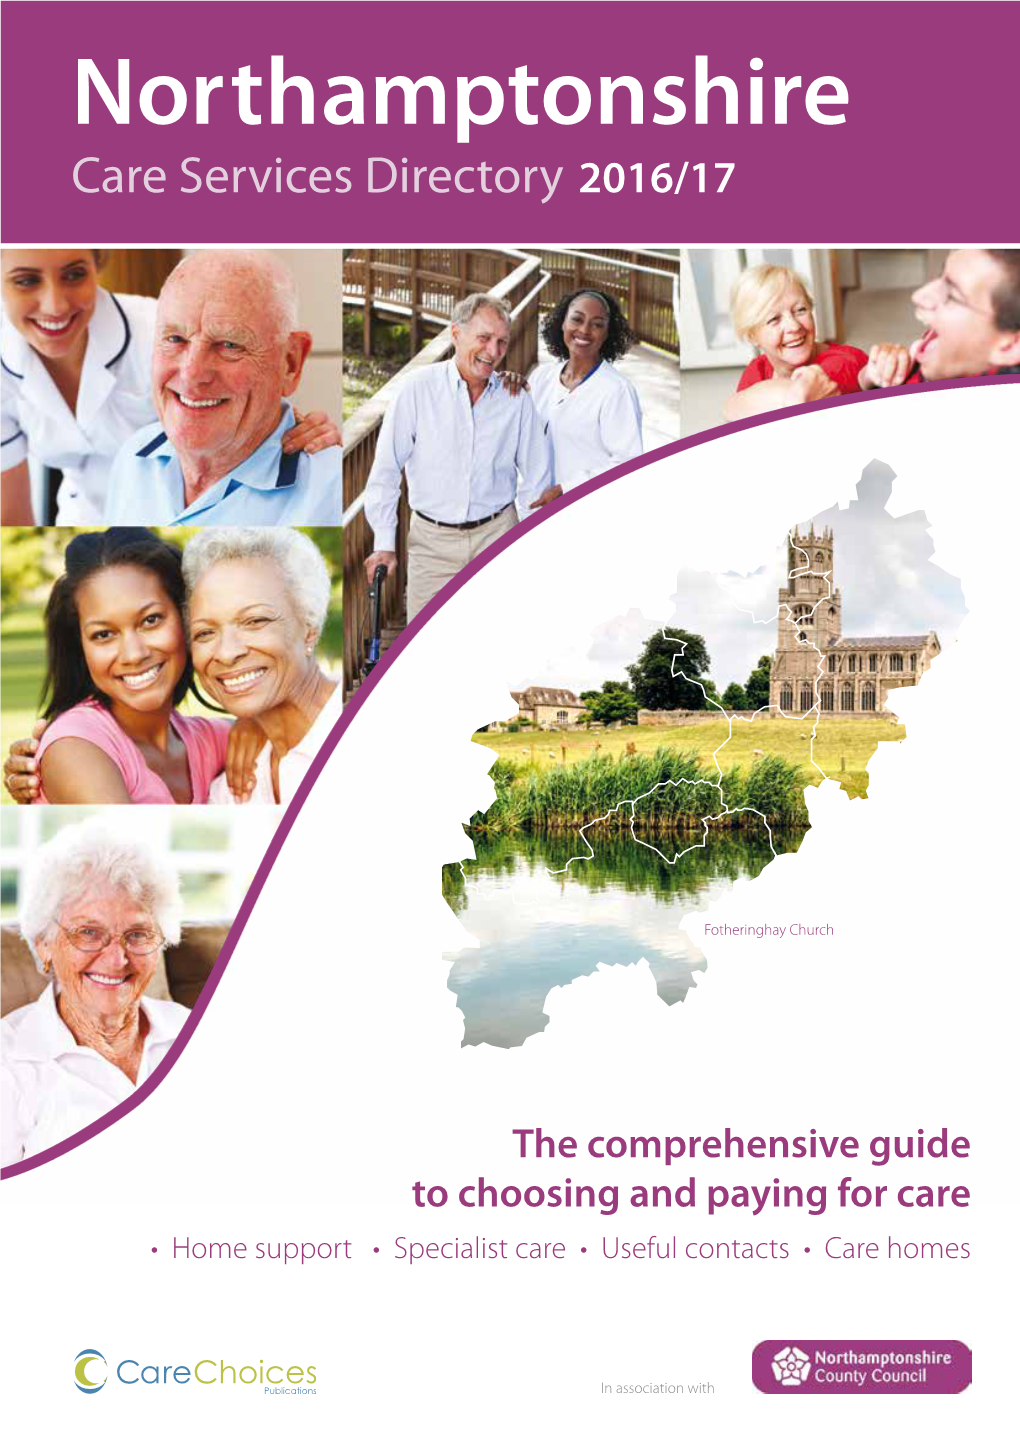 Northamptonshire Care Services Directory 2016/17